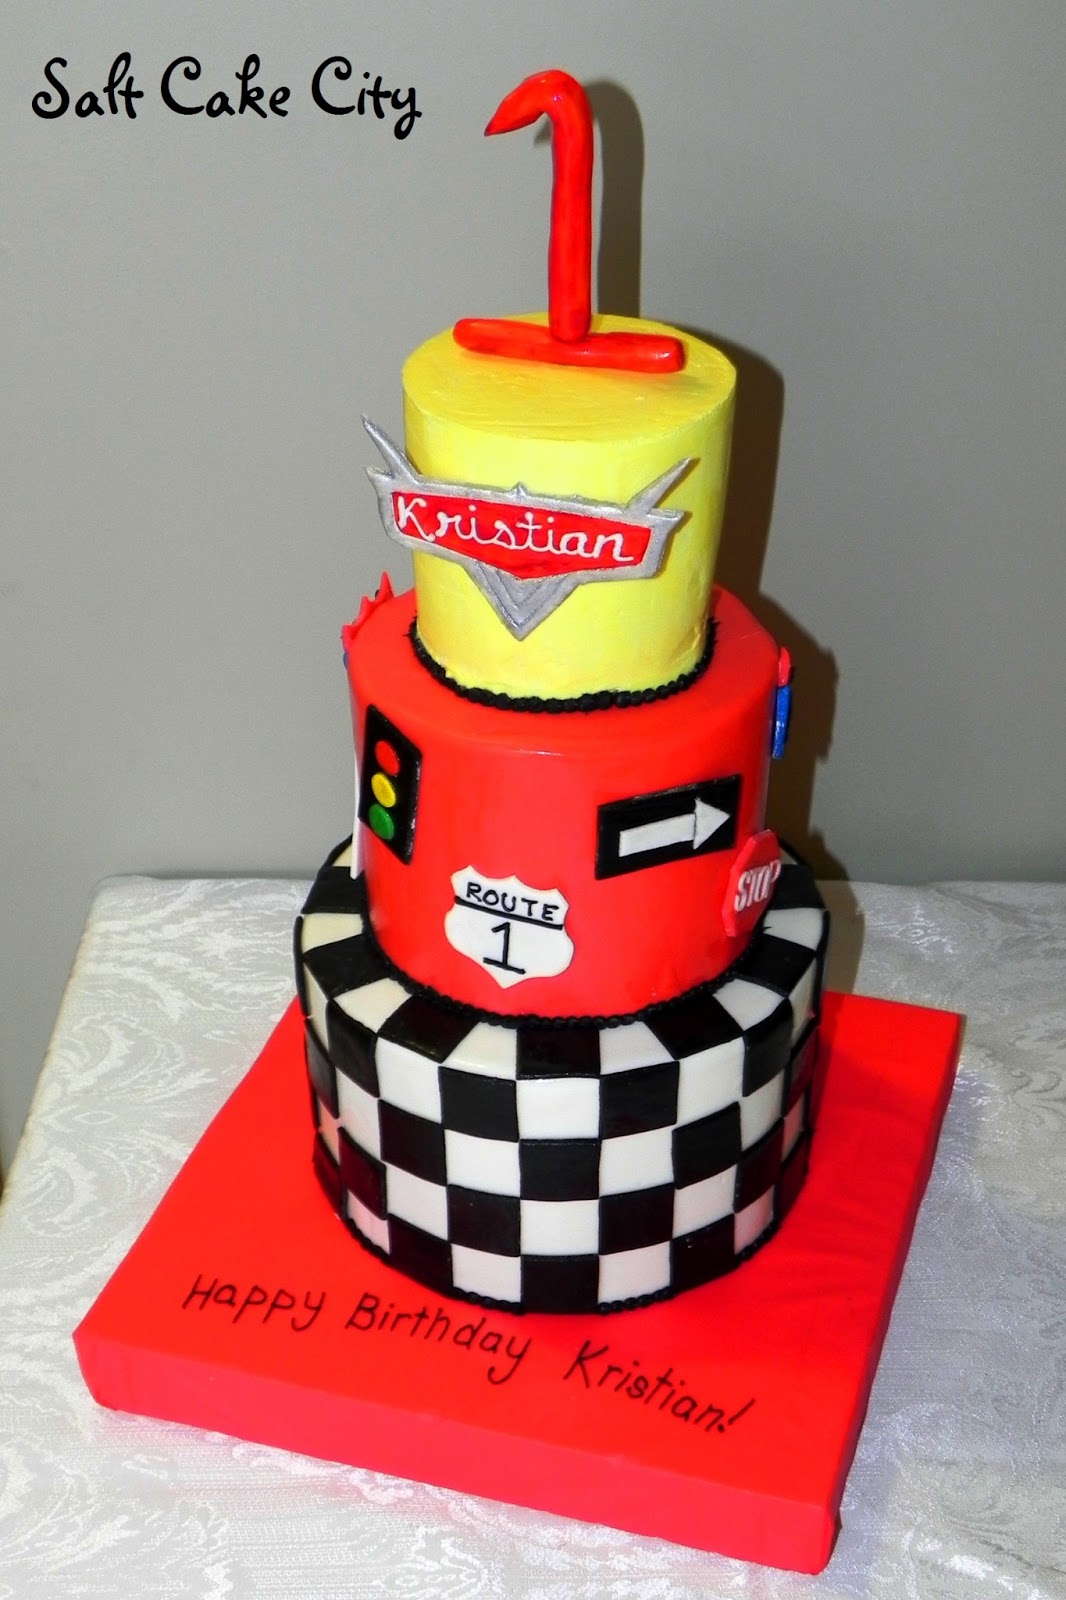 Start Your Engines Cake